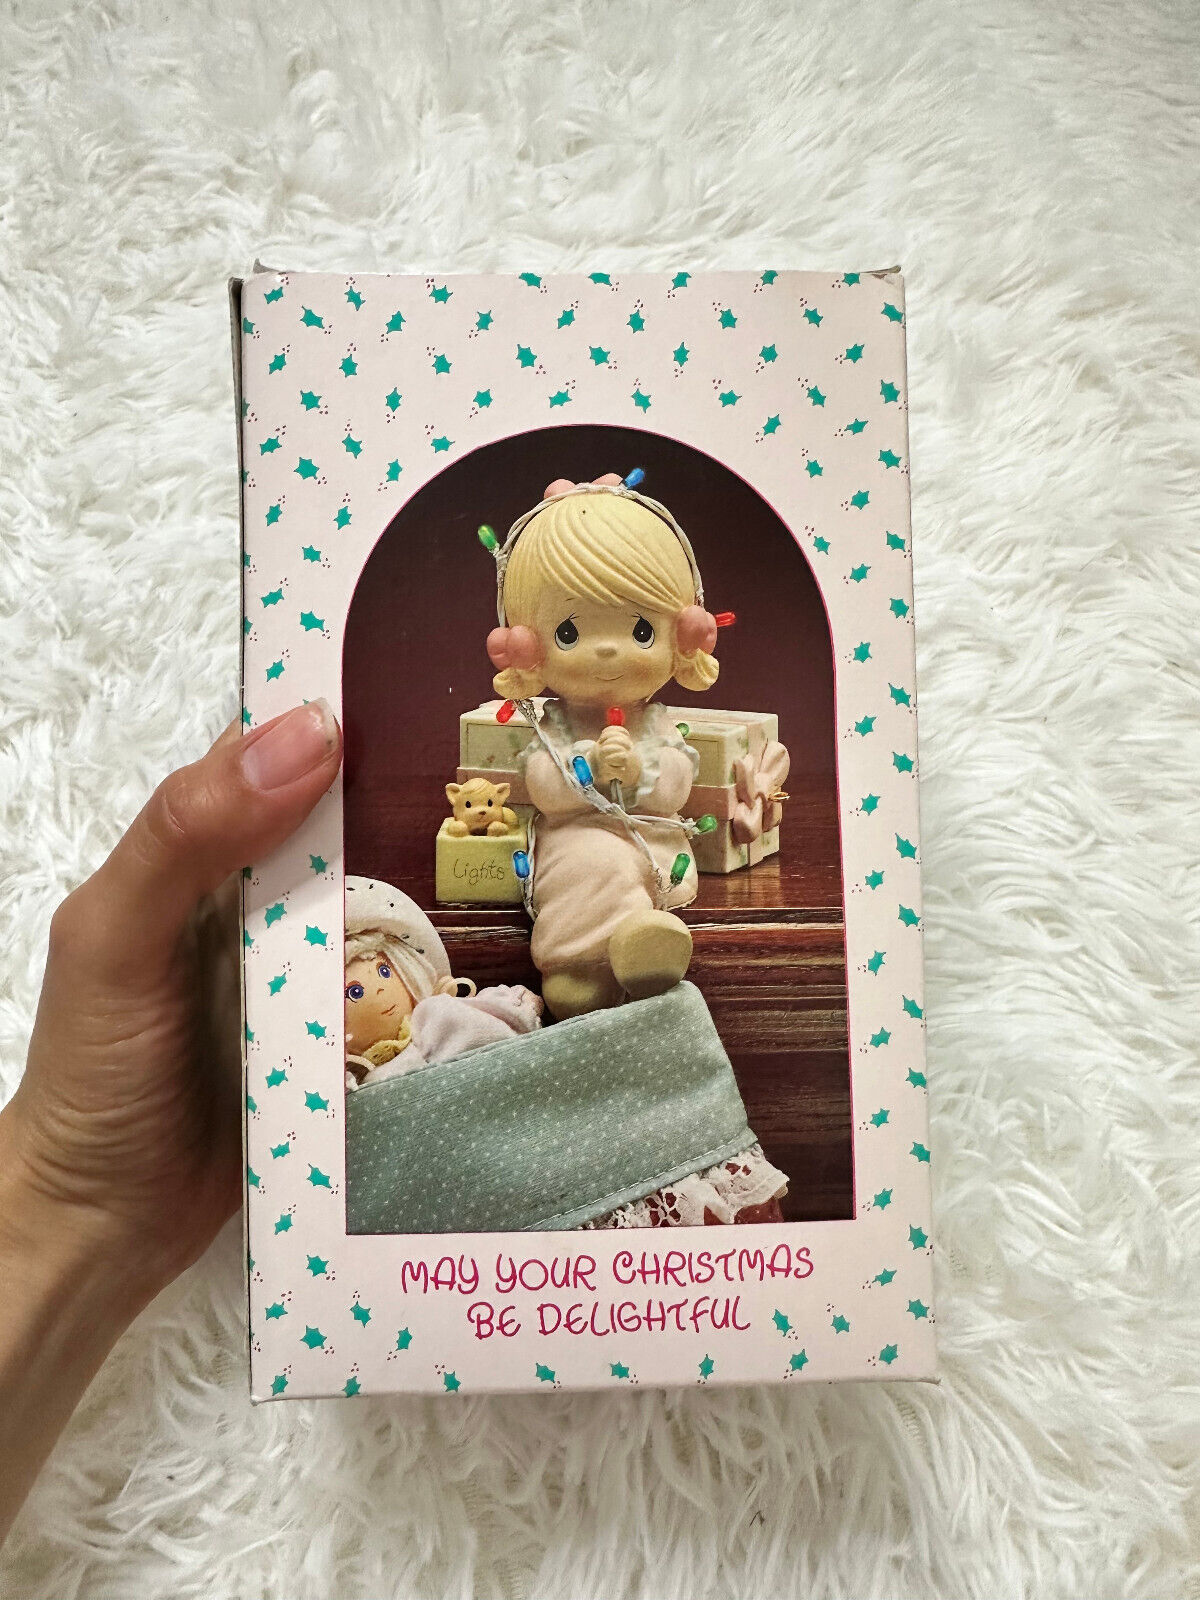 1990 Precious Moments May Your Christmas Be Delightful 566977 Girl w/ Teddy Bear